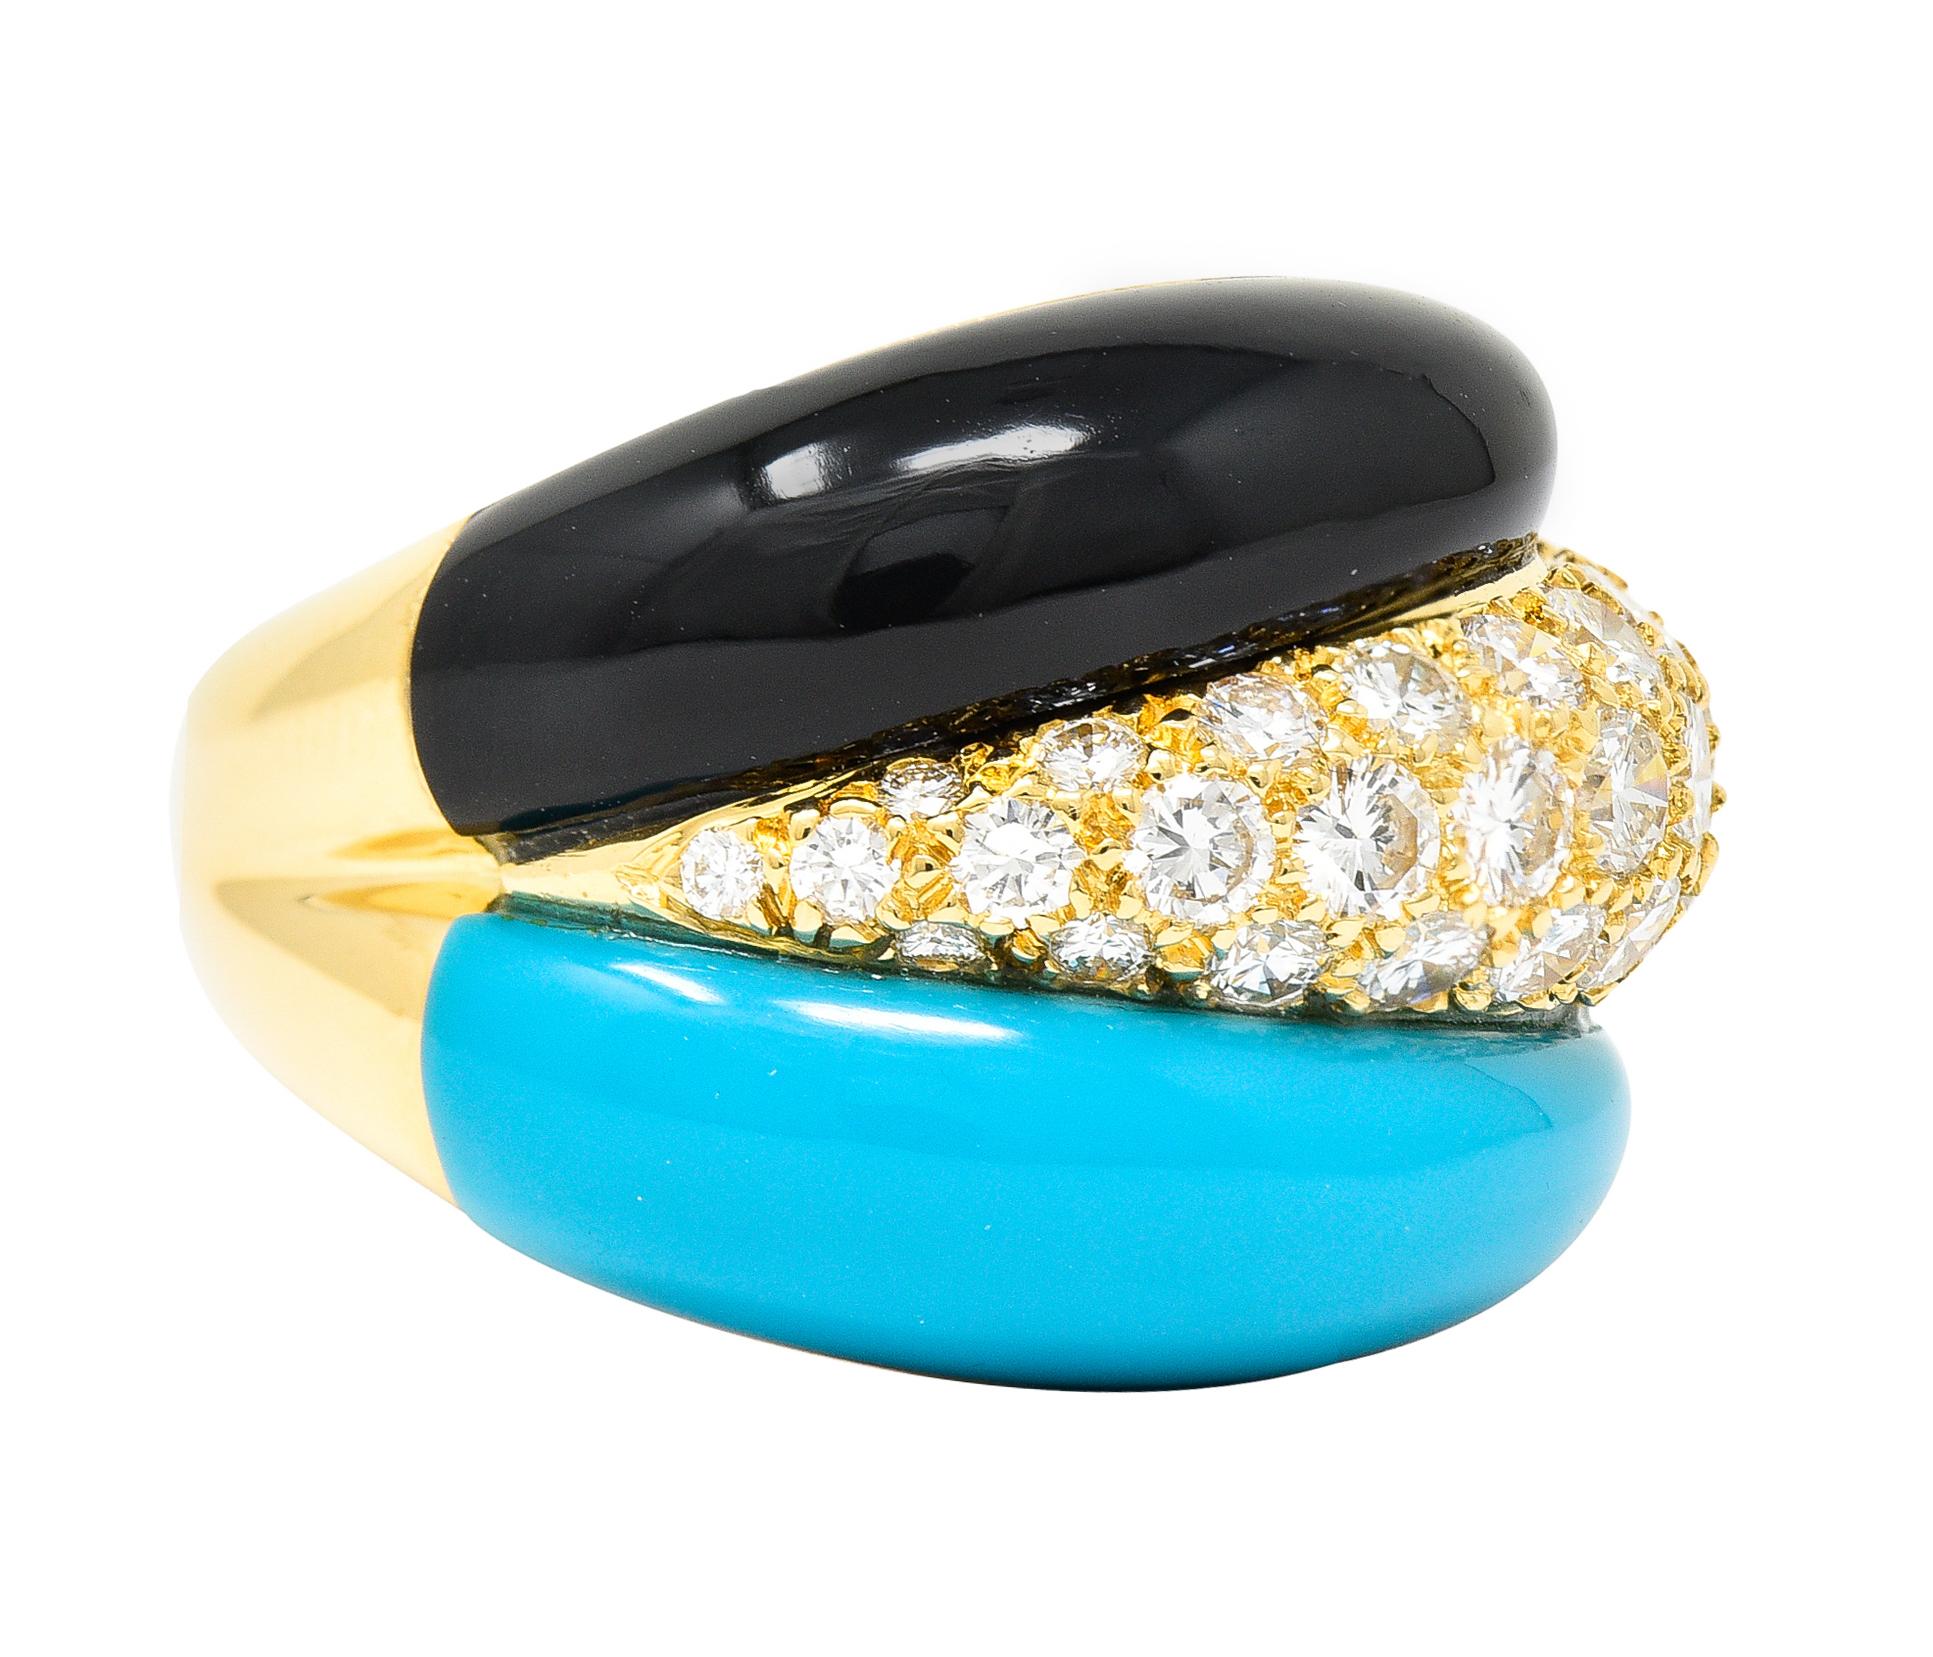 Designed as a segmented bombé style ring centering round brilliant cut diamonds. Pavé set and weighing 1.51 carats total - G/H in color with VS clarity. Flanked by carved tapered turquoise and onyx cabochons. Turquoise is opaque robin's egg blue in